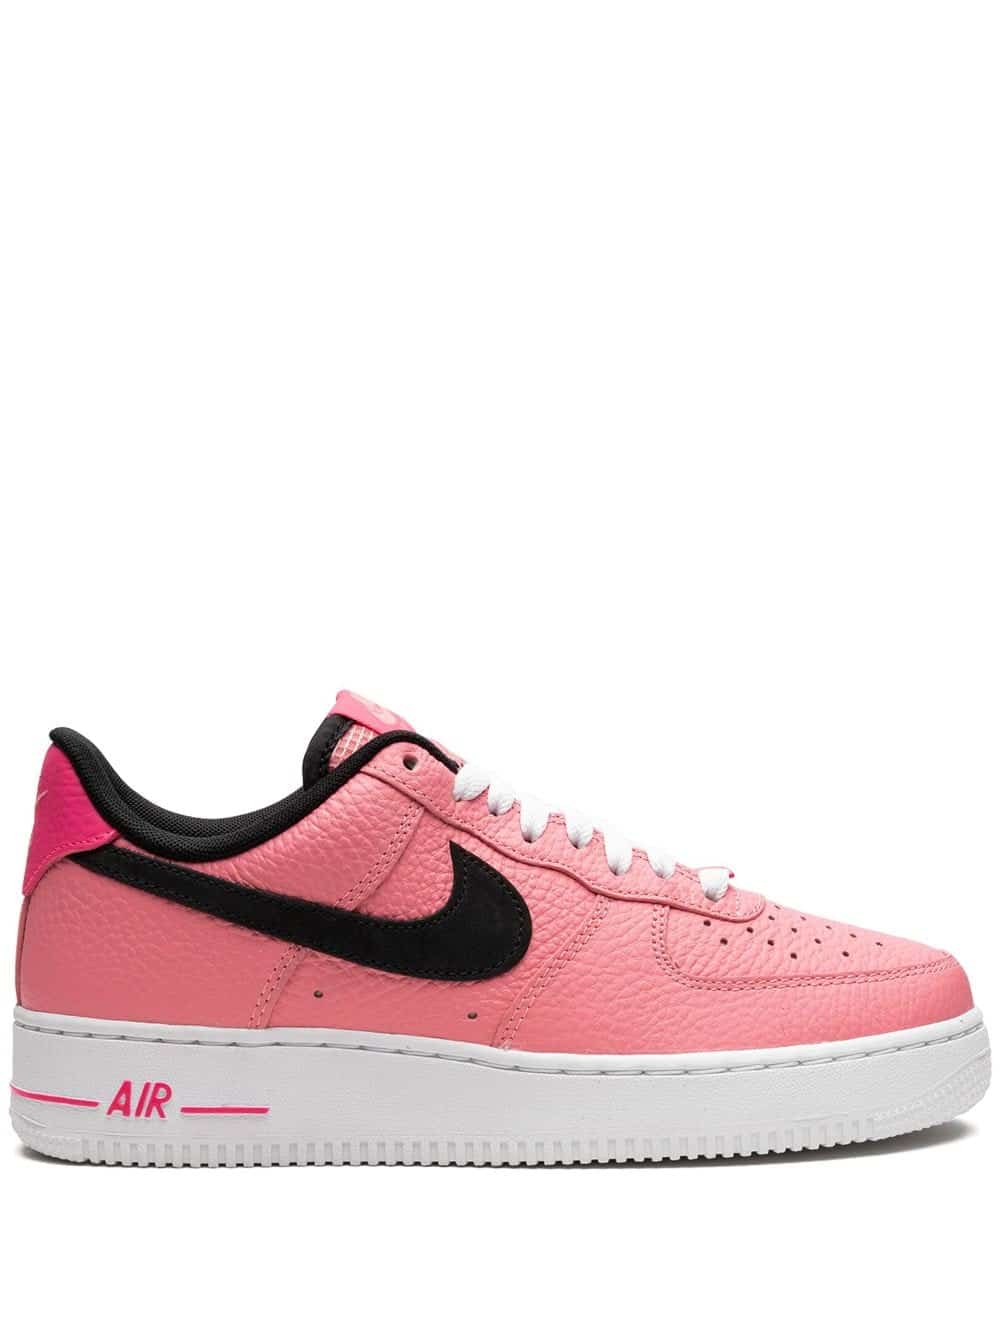 Nike Air Force 1 '07 LV8 sneakers - Roze